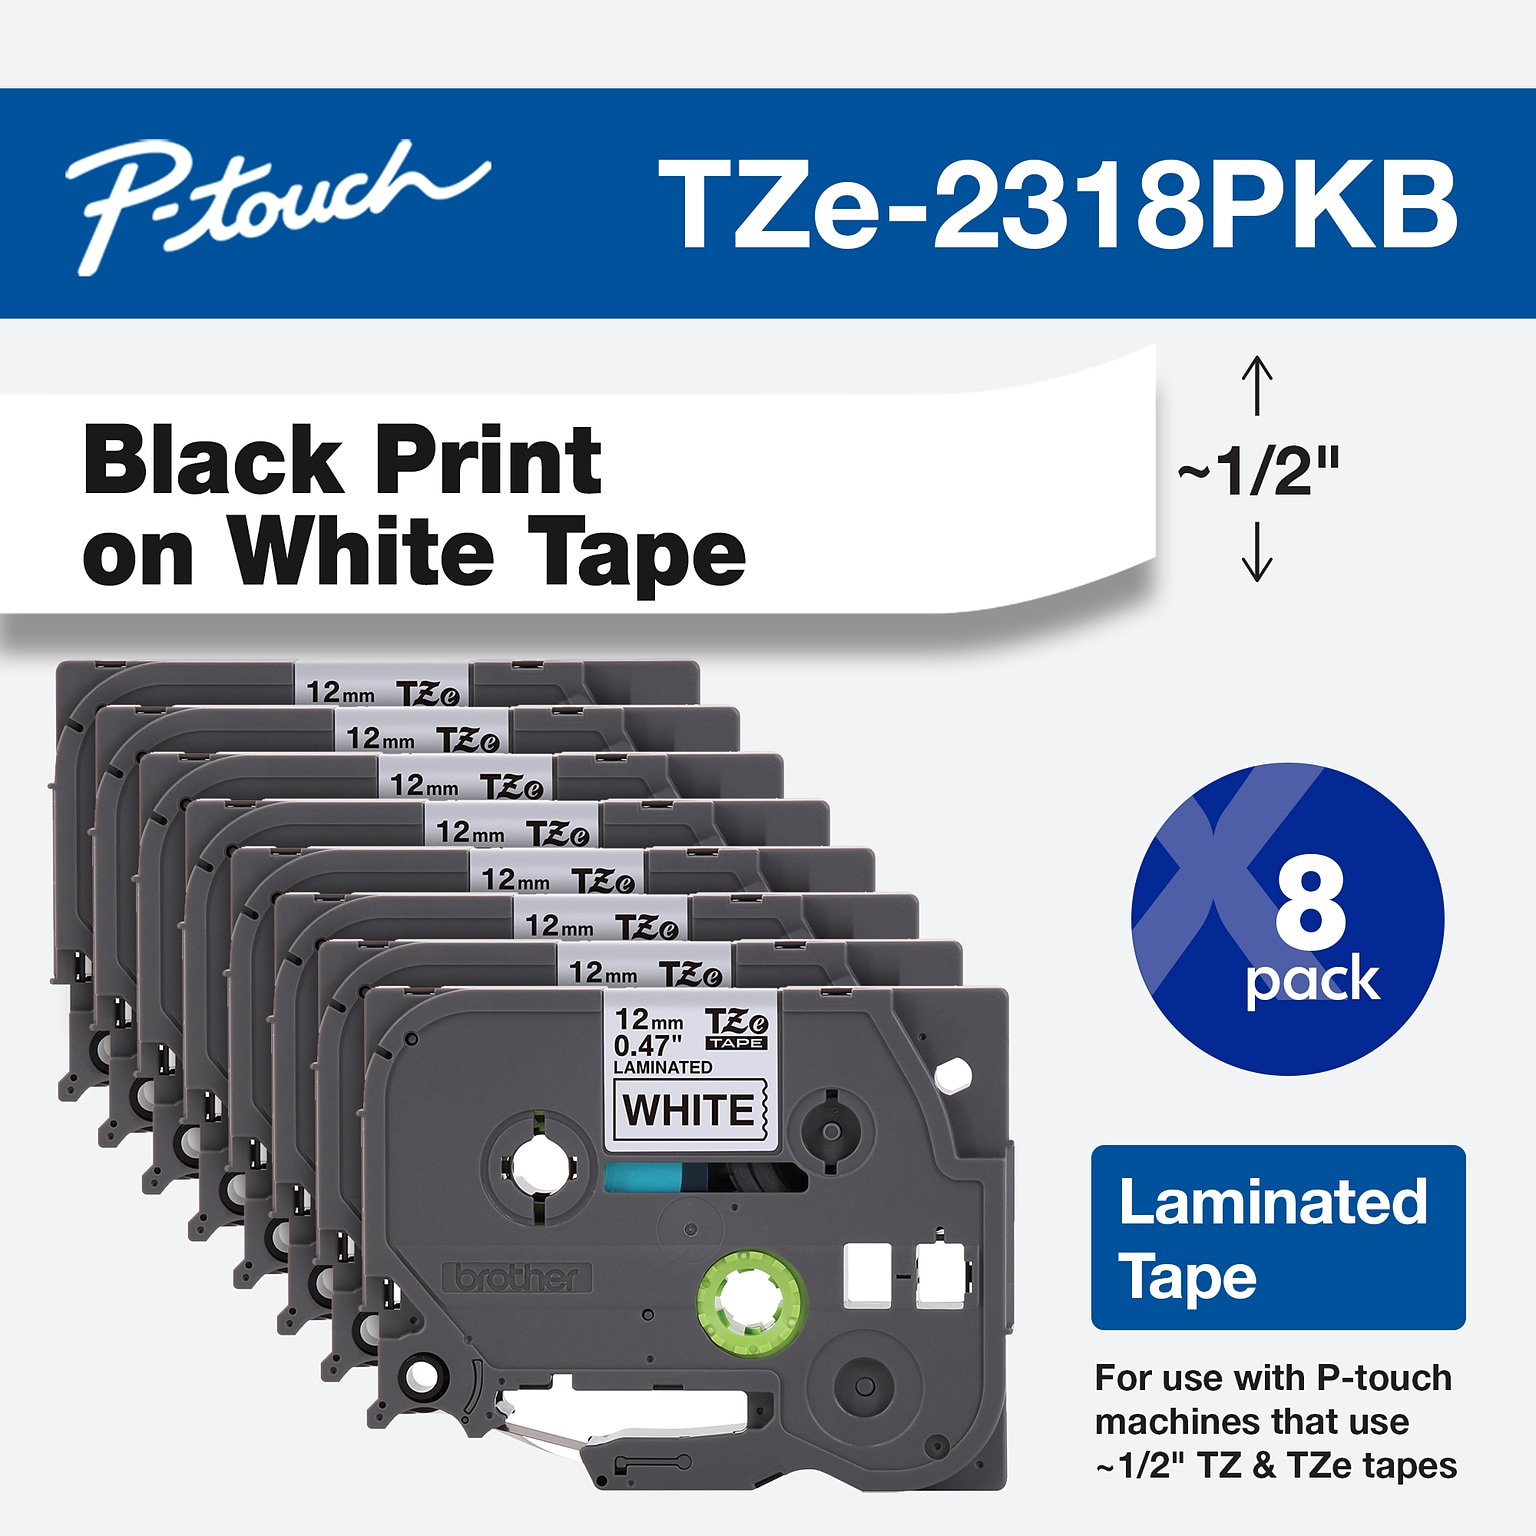 Brother P-touch TZe-231 Laminated Label Maker Tape, 1/2 x 26-2/10, Black on White, 8/Pack (TZe-2318PKB)